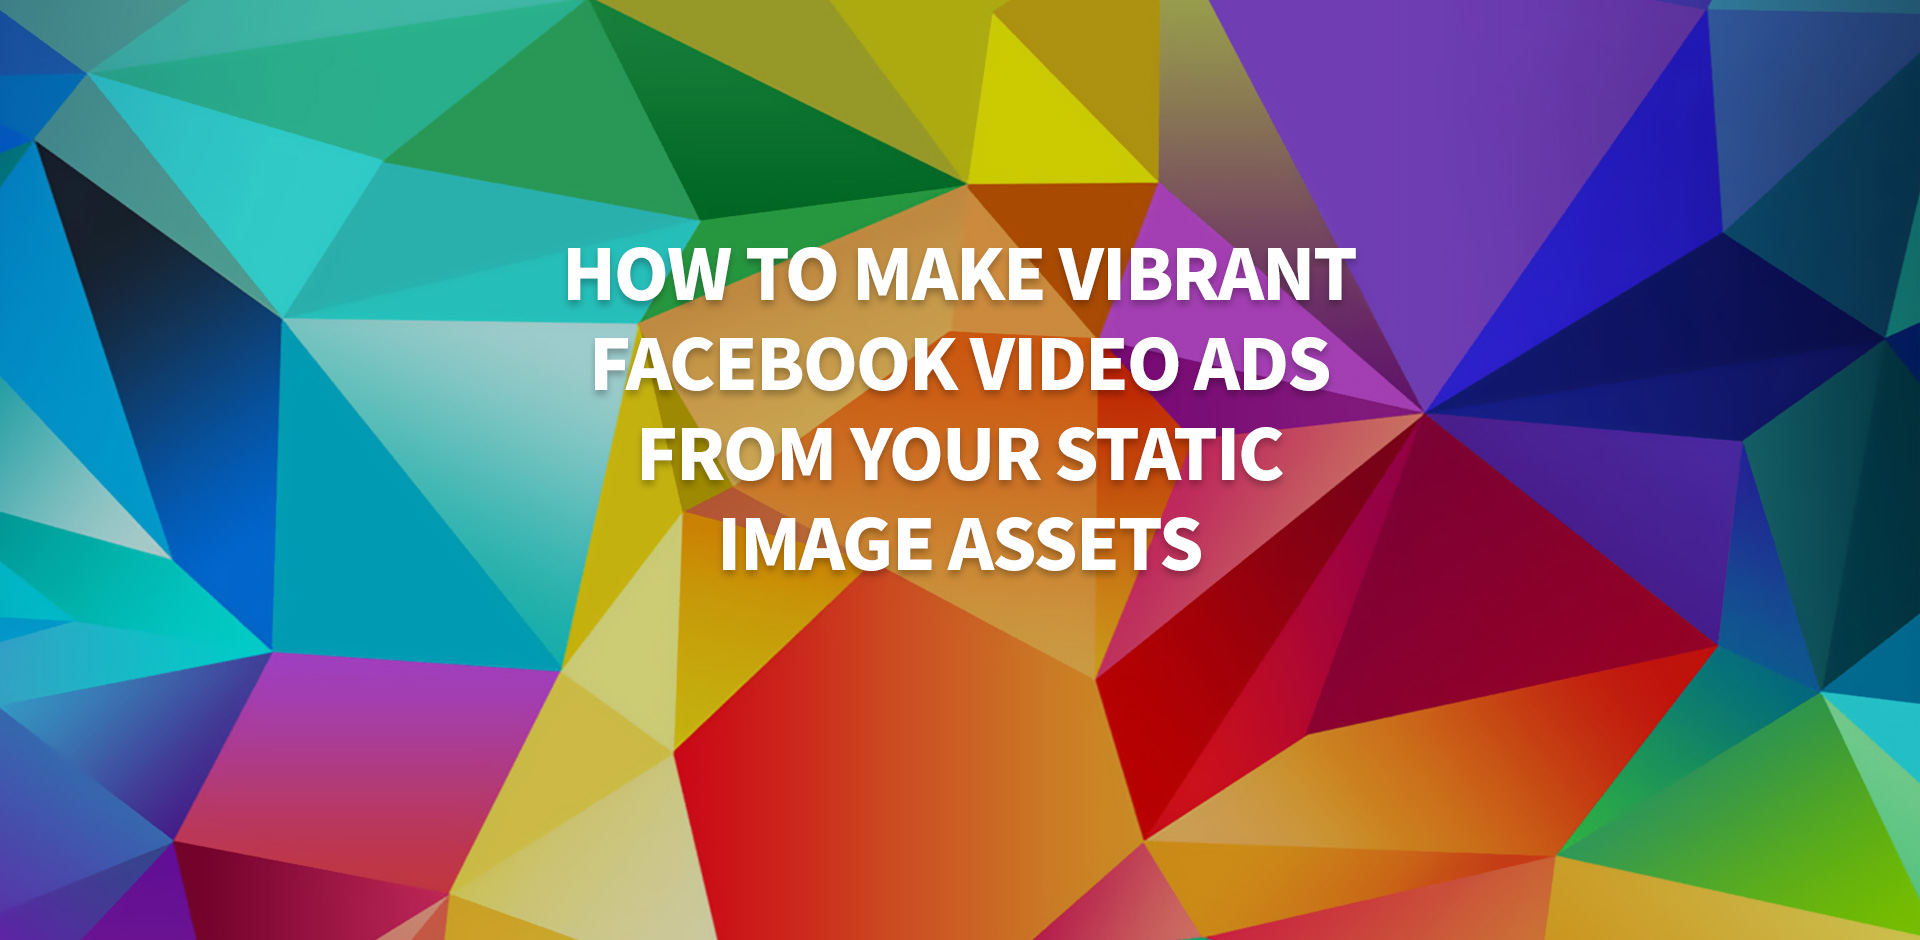 How to Make Vibrant Facebook Video Ads from Your Static Image Assets